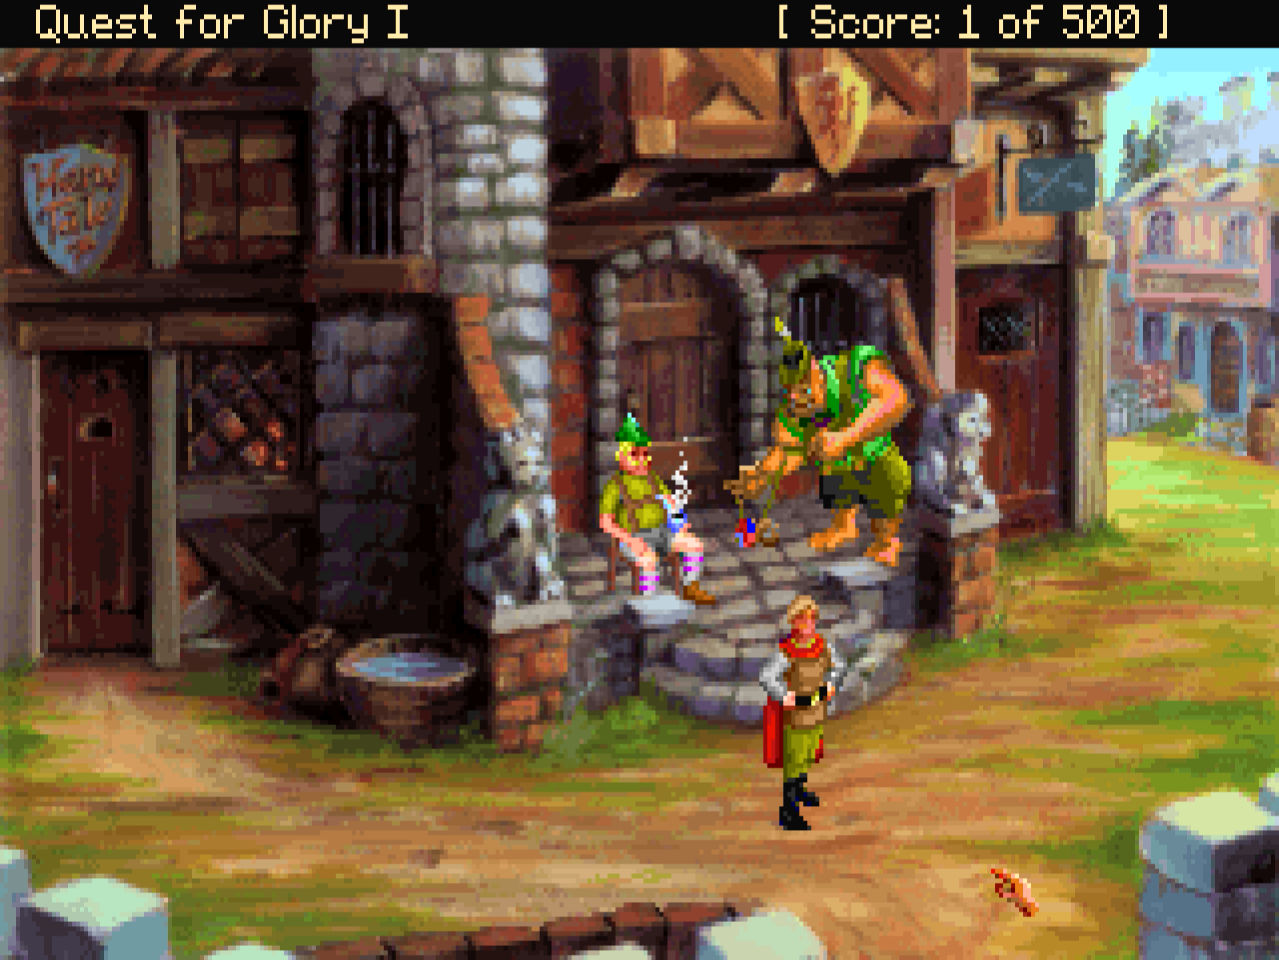 The Hero standing by the sheriff in VGA version